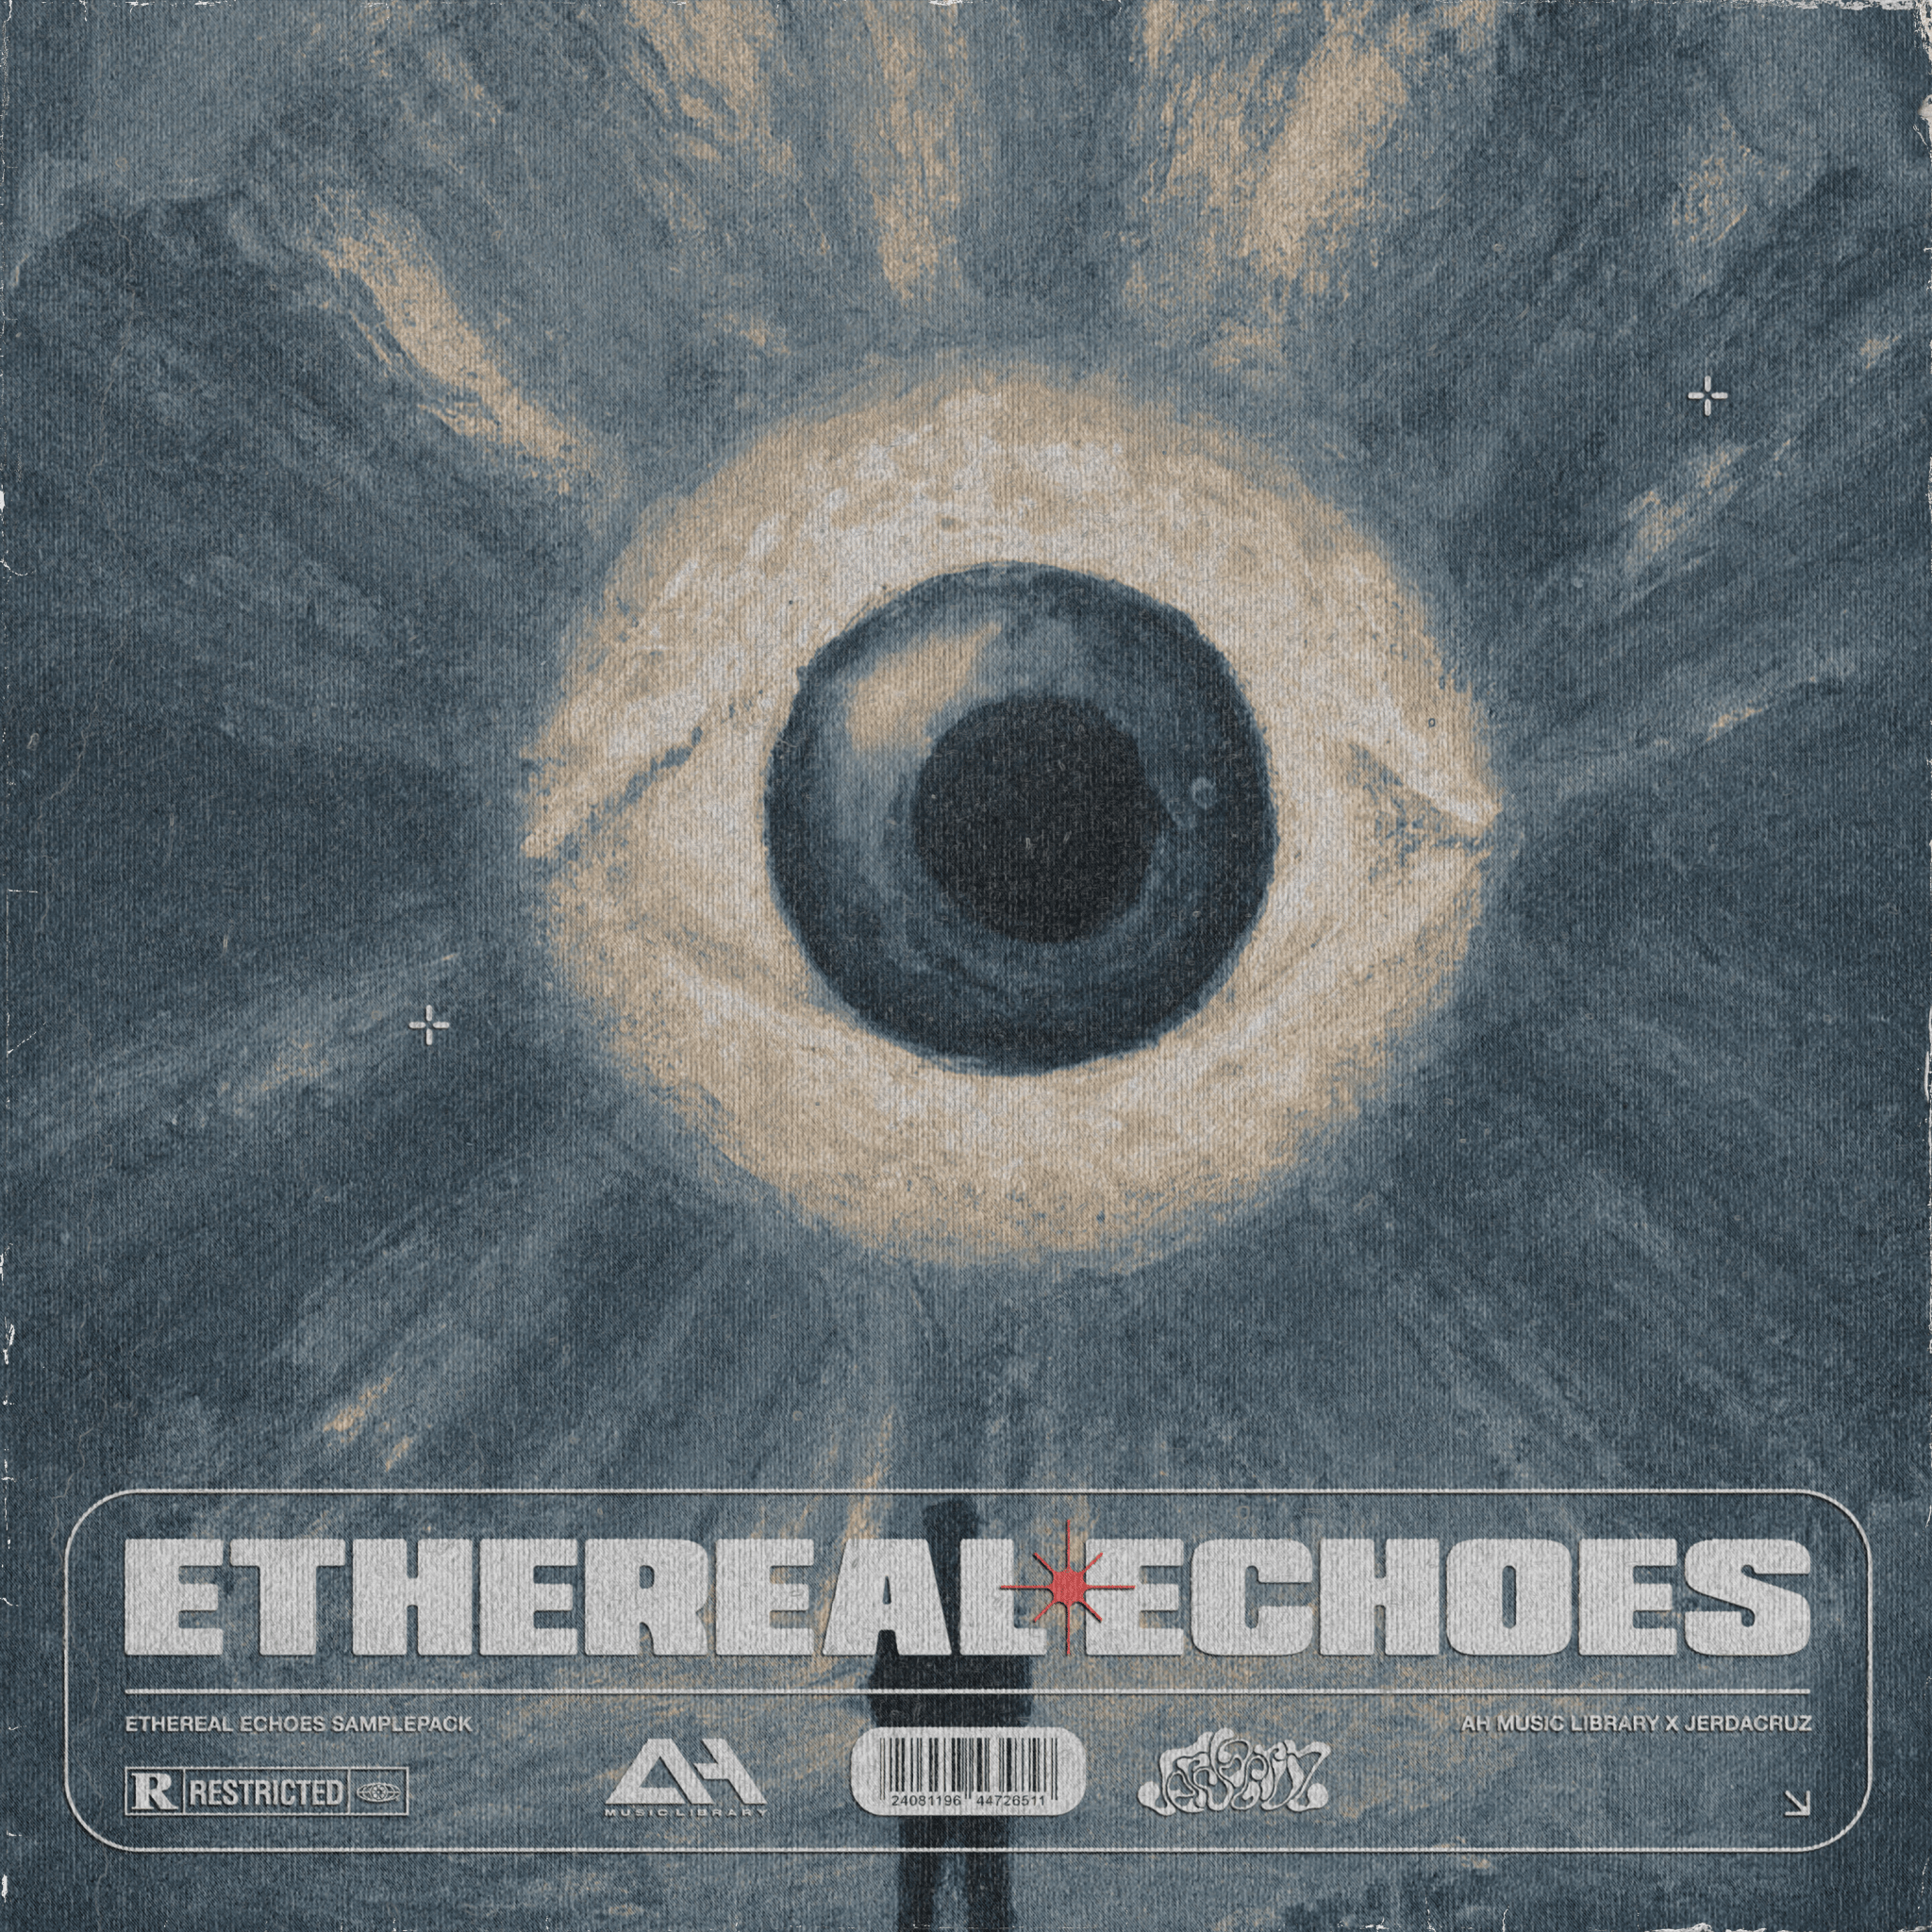 AH Music Libray 003 - Ethereal Echoes Sample Pack - AH Music Library